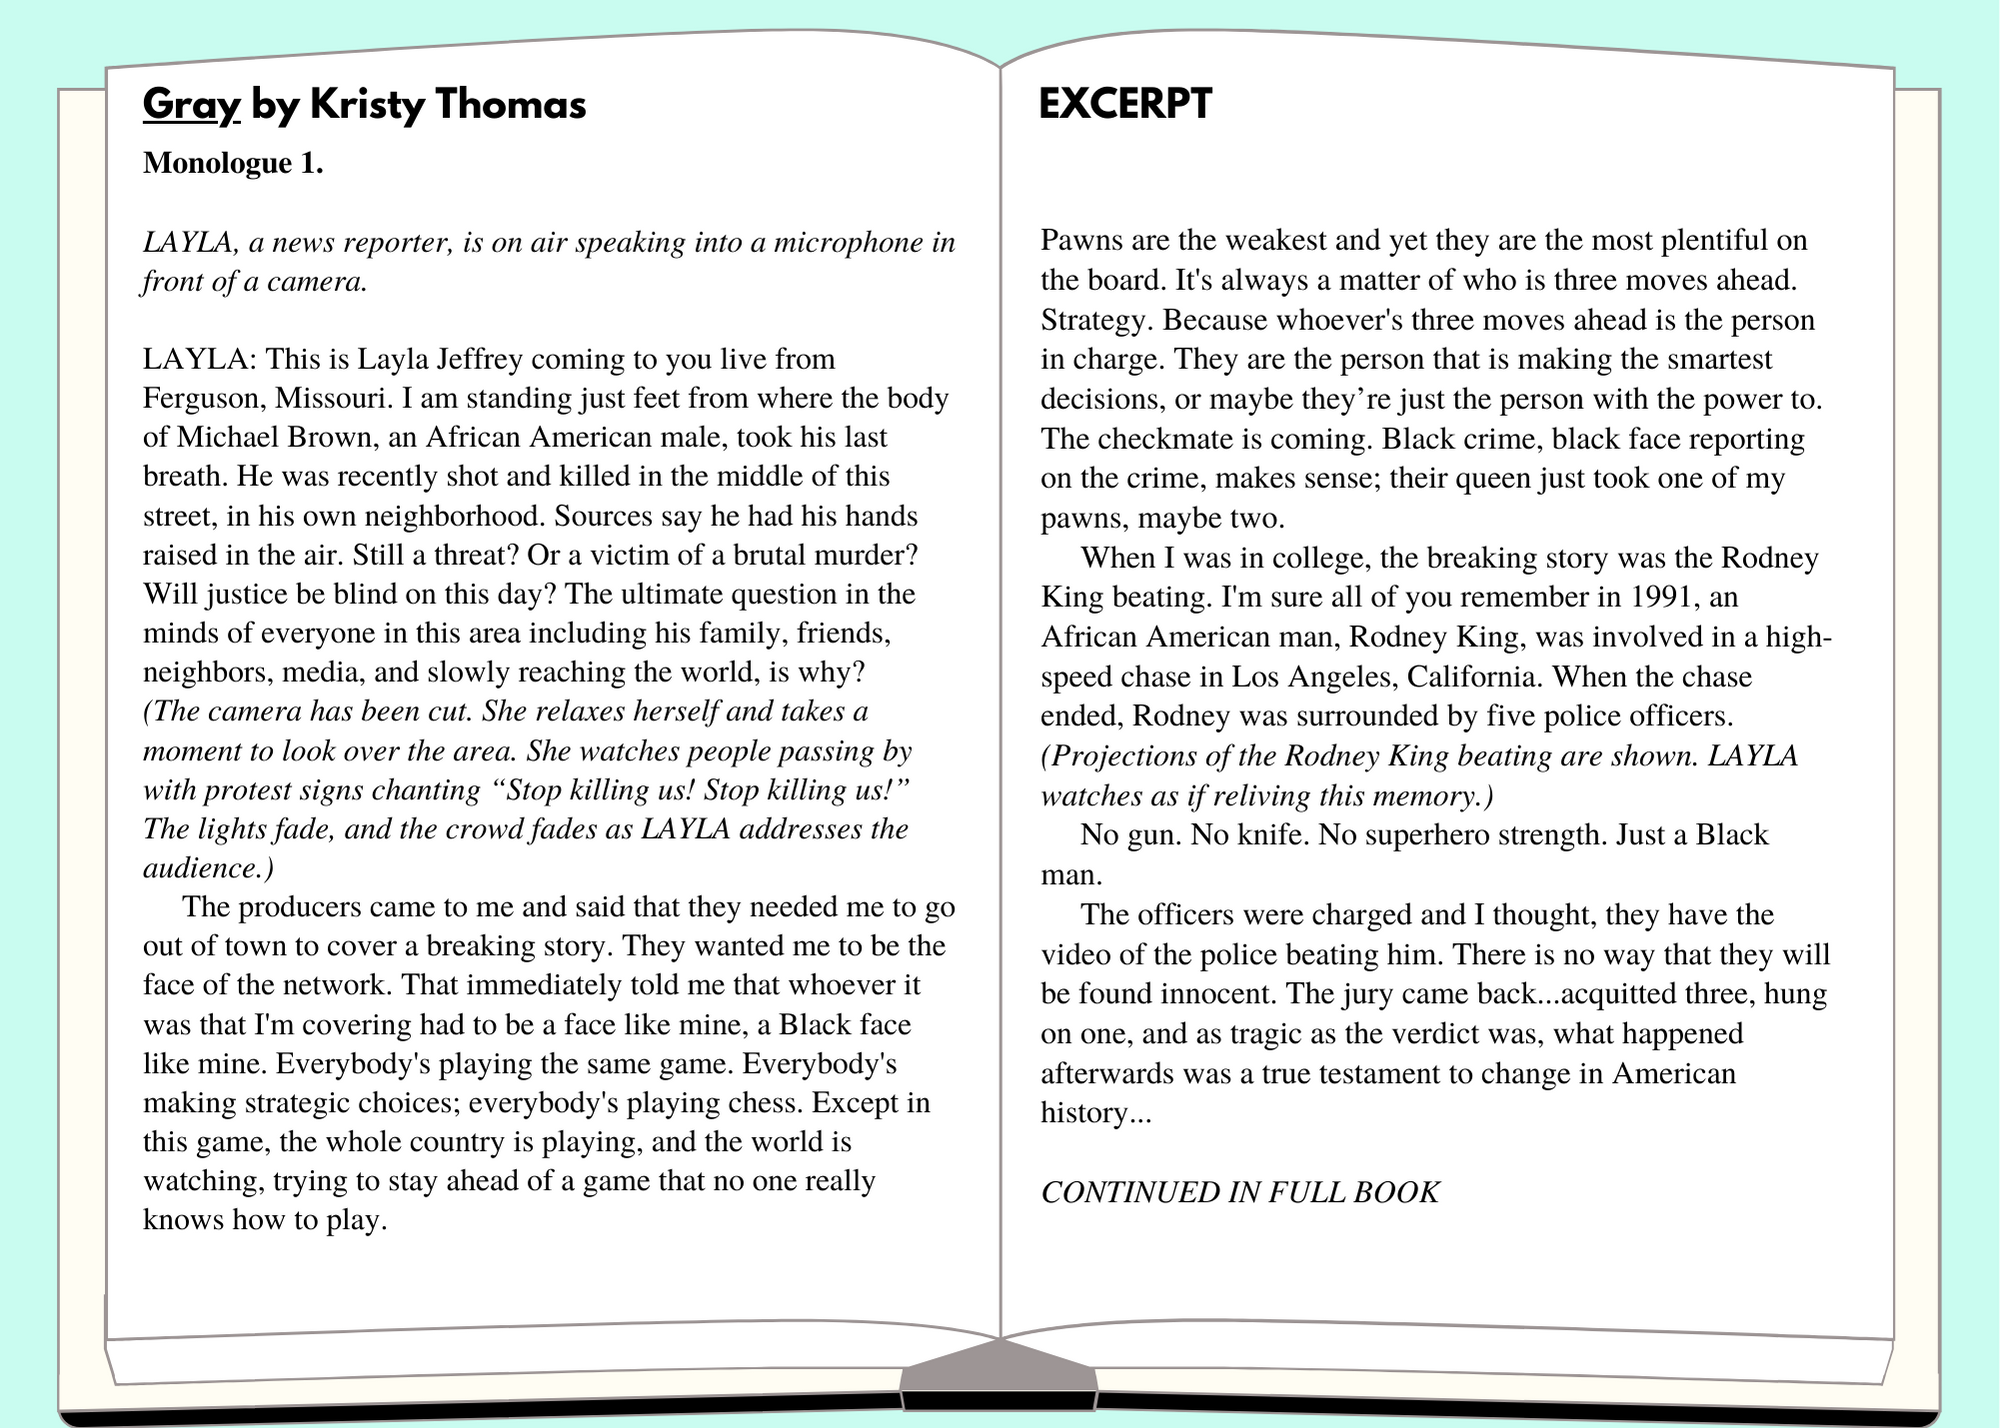 An excerpt from GRAY by Kristy Thomas. Full scene is available in the book.